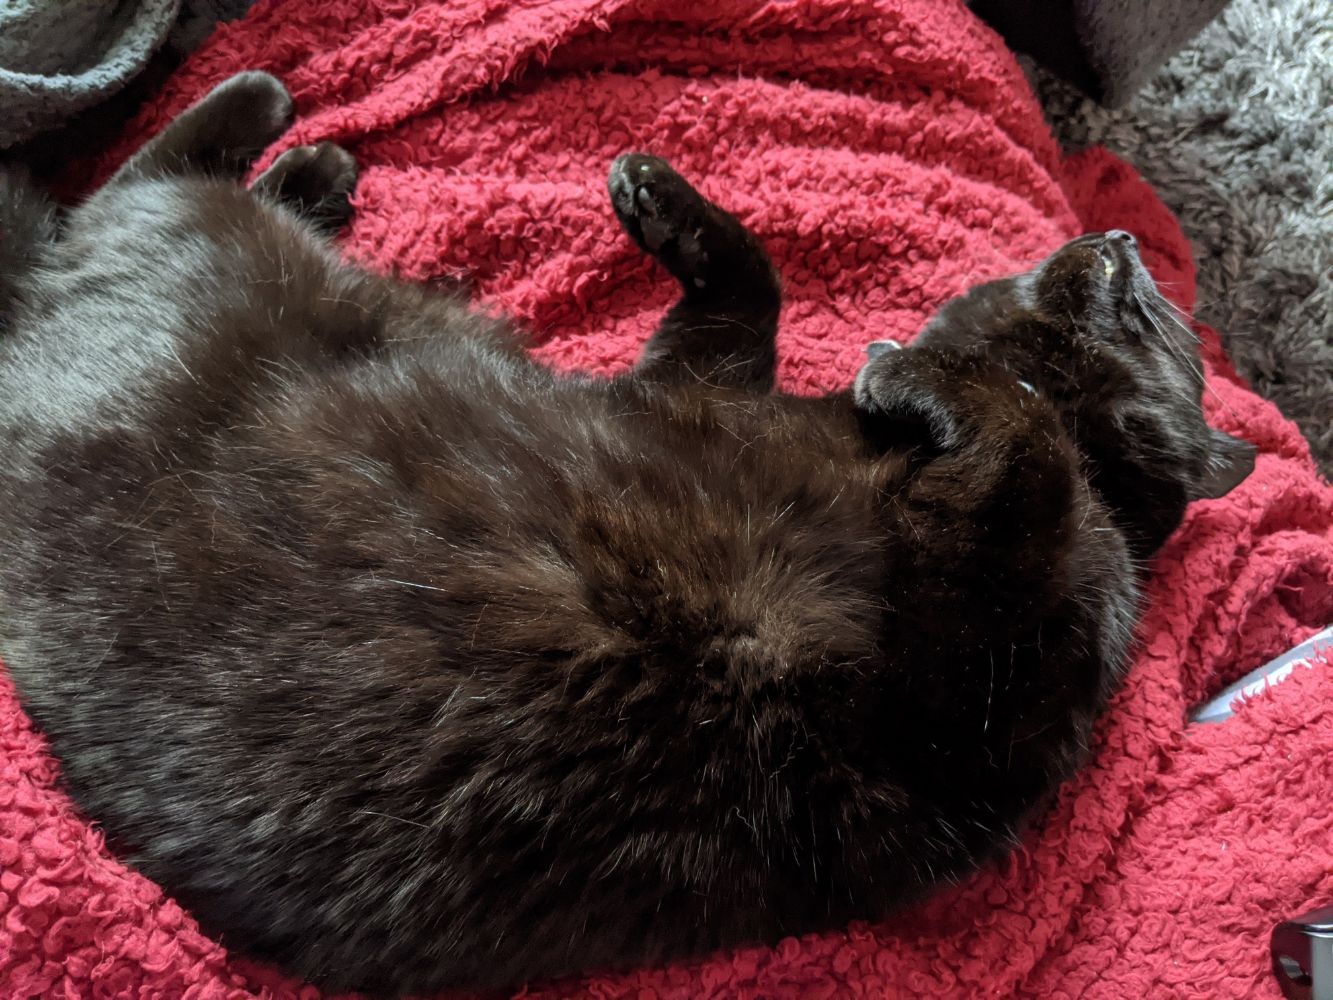 Black cat lying on a red blanket, on his side, flopped and looking quite comfortable